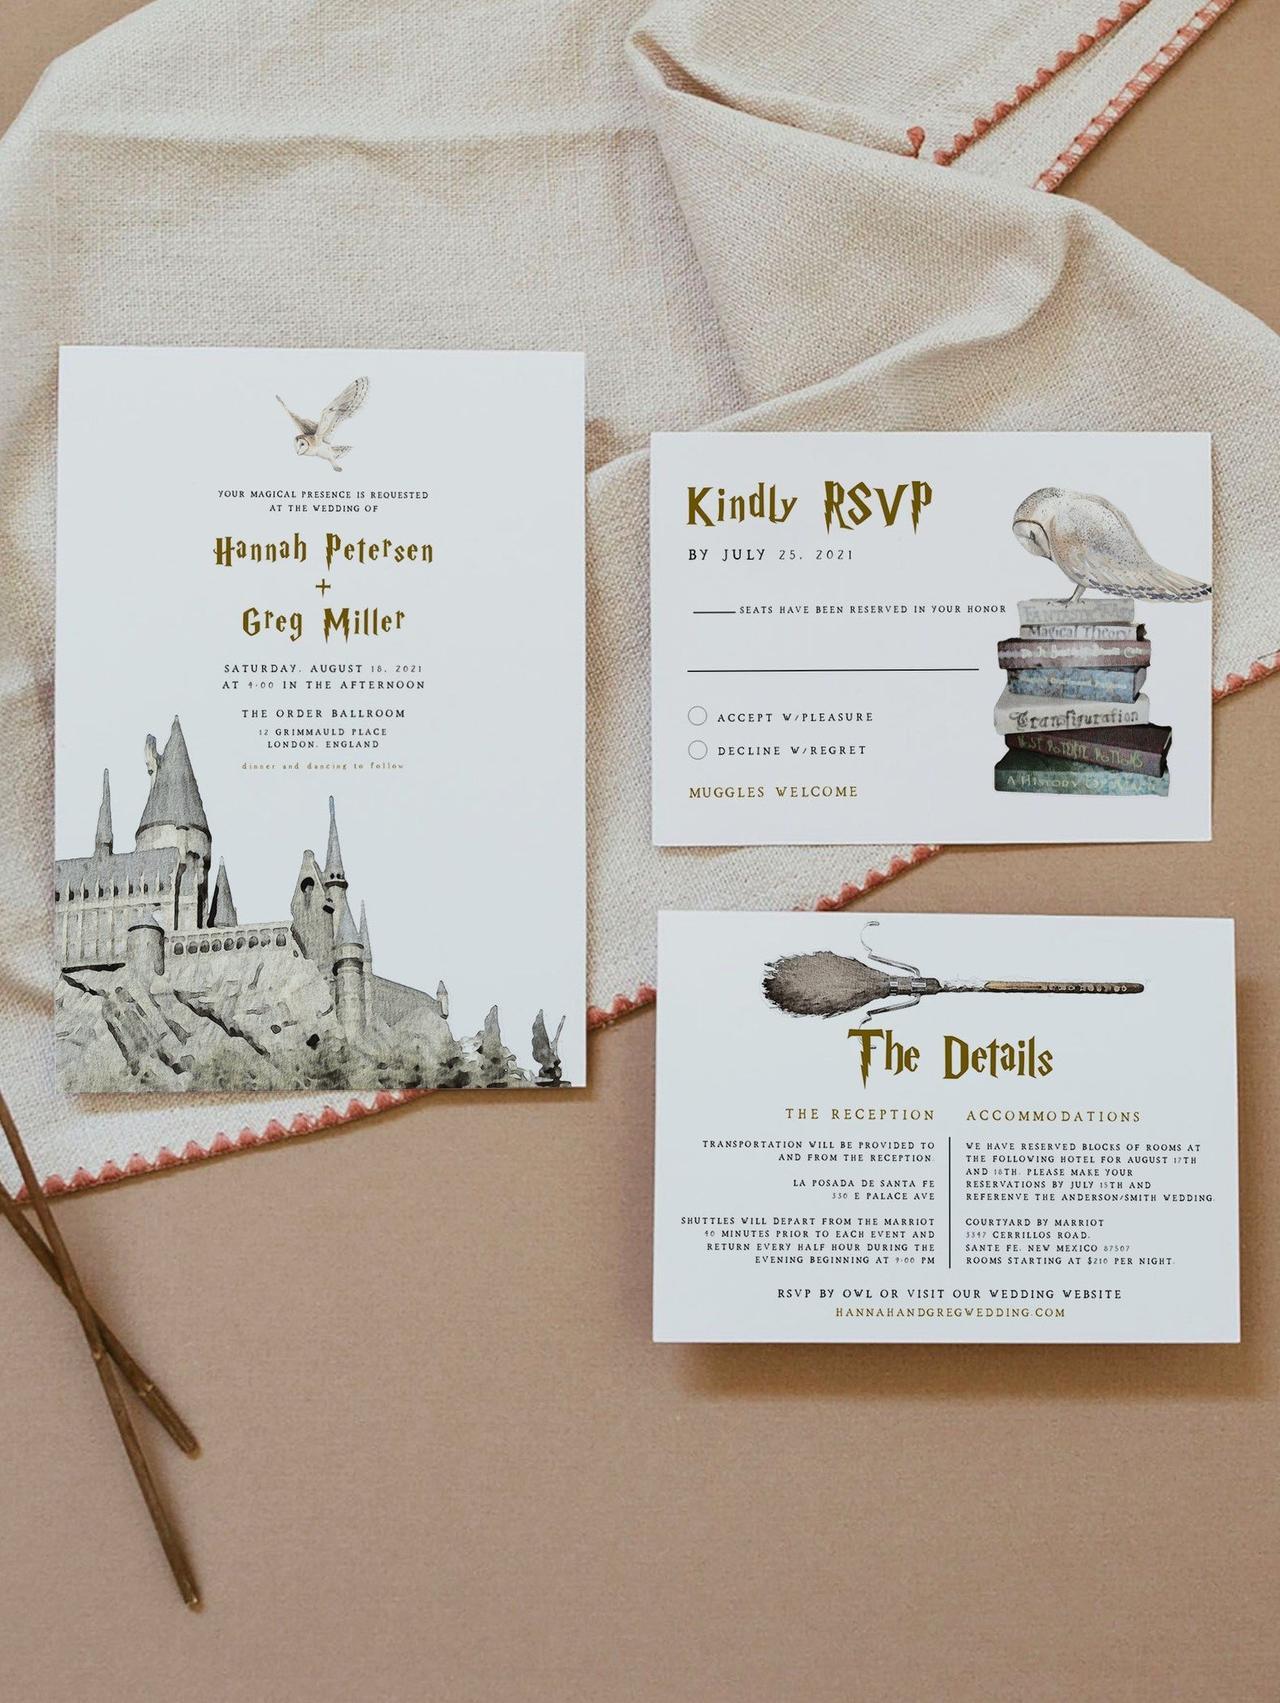 The Ultimate Harry Potter Wedding Guide With 100+ Ideas!